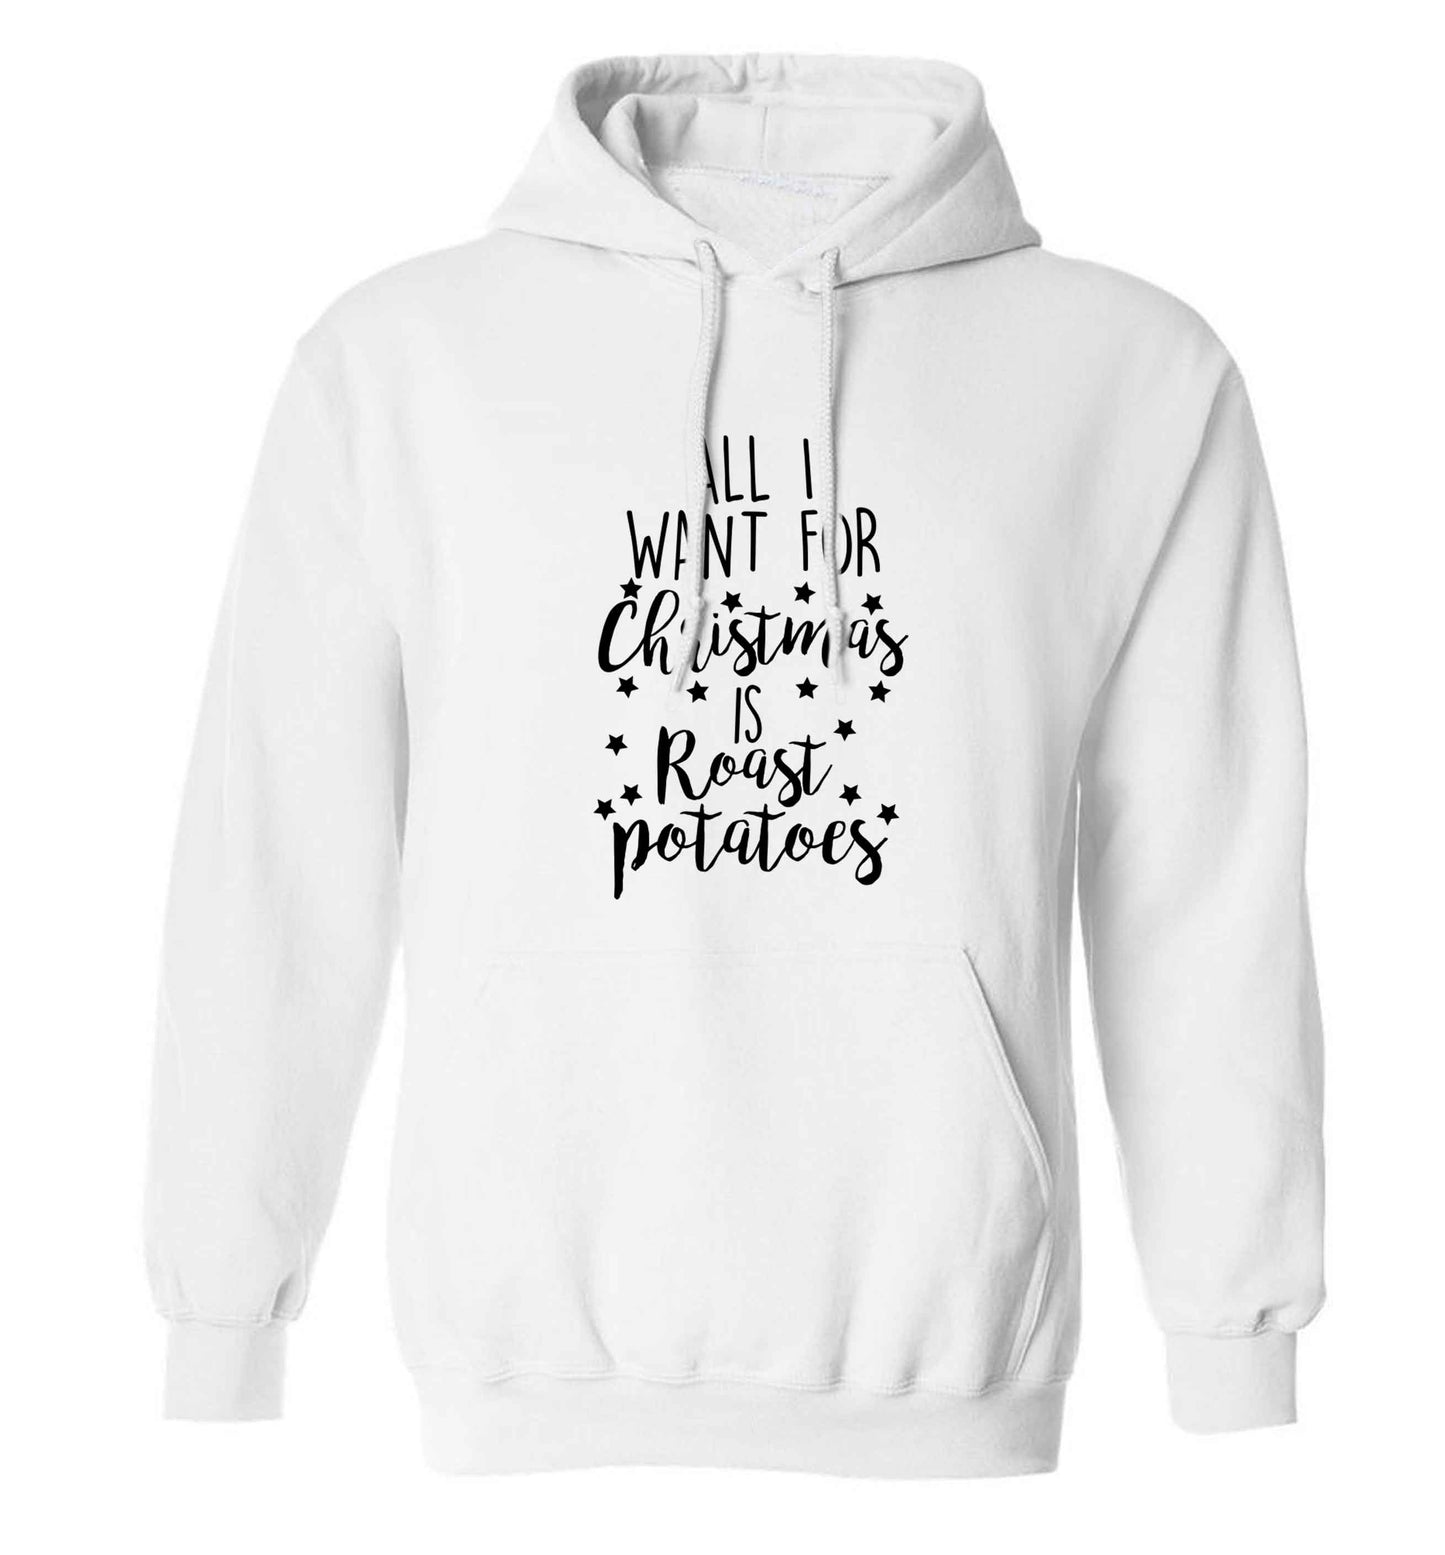 All I want for Christmas is roast potatoes adults unisex white hoodie 2XL